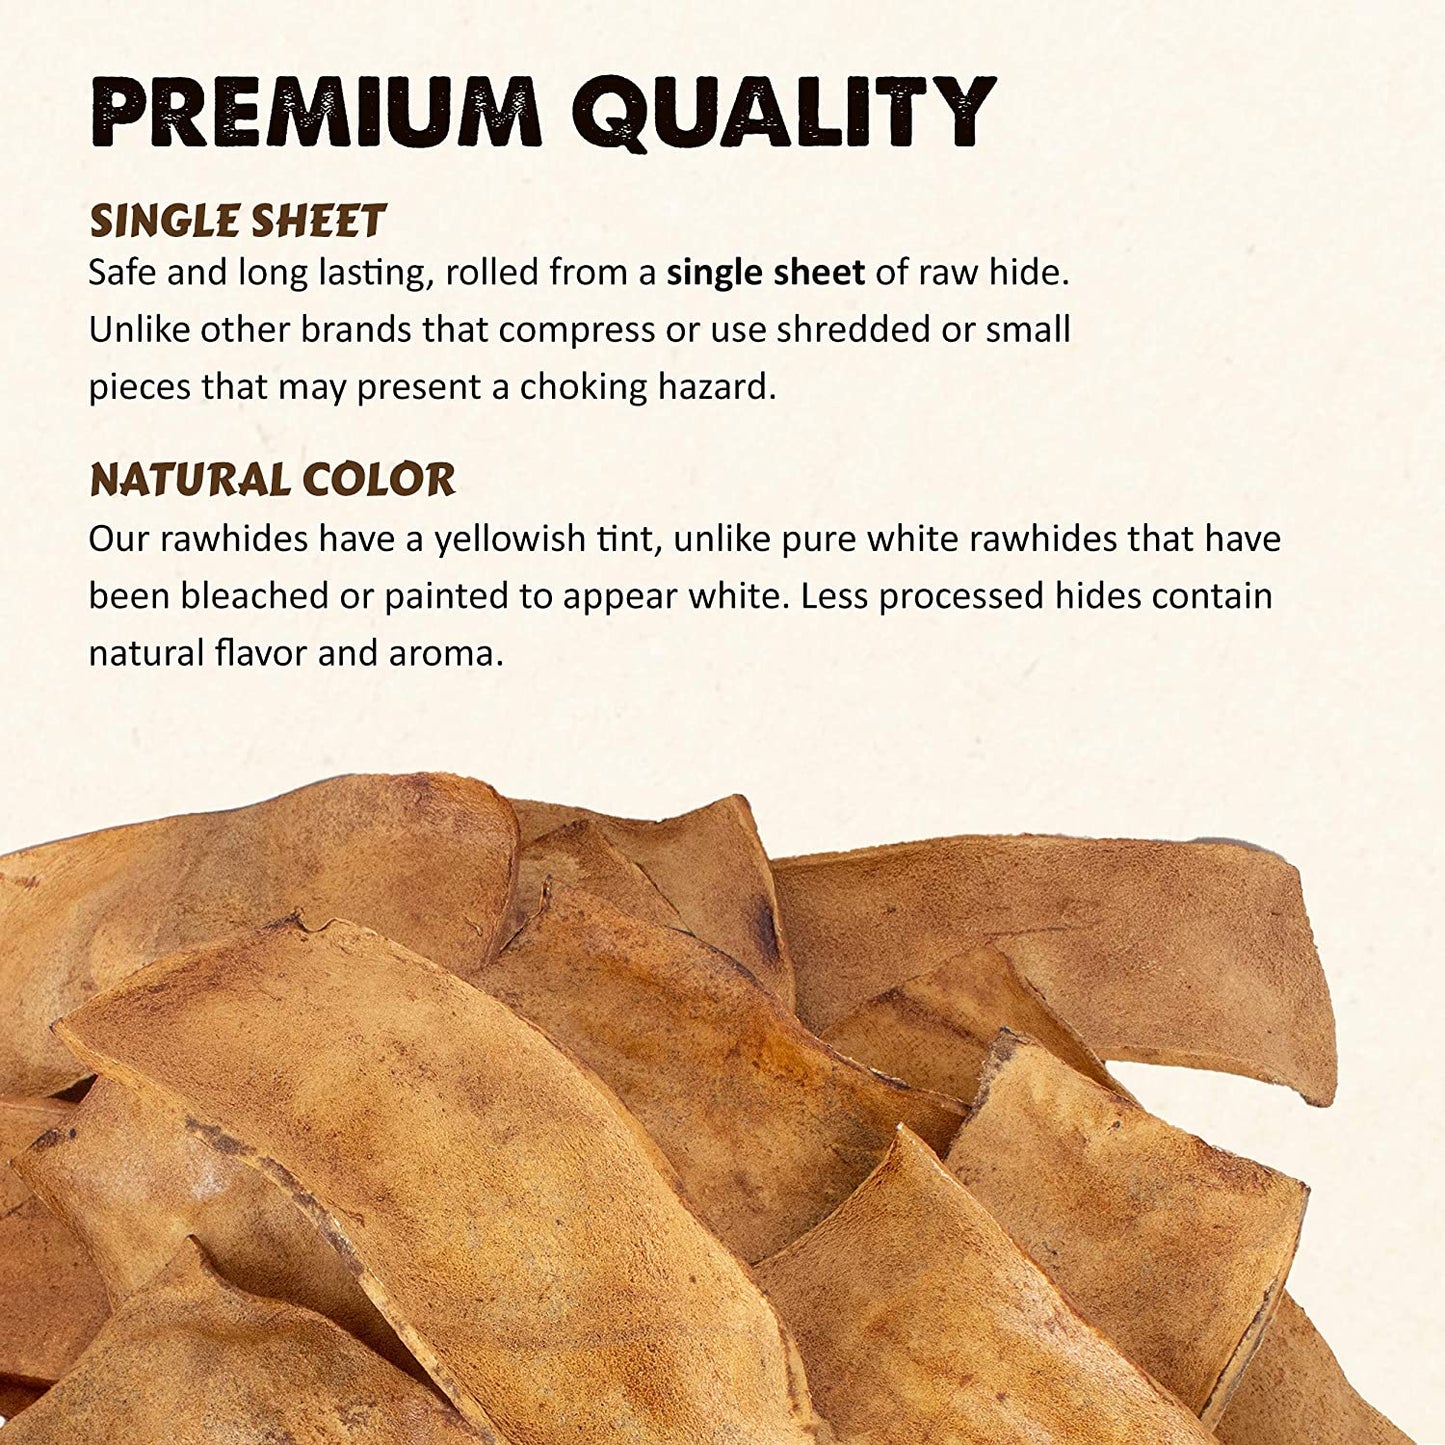 Beef Rawhide Chips - 100% Natural Dog Chew Treat - By Weight